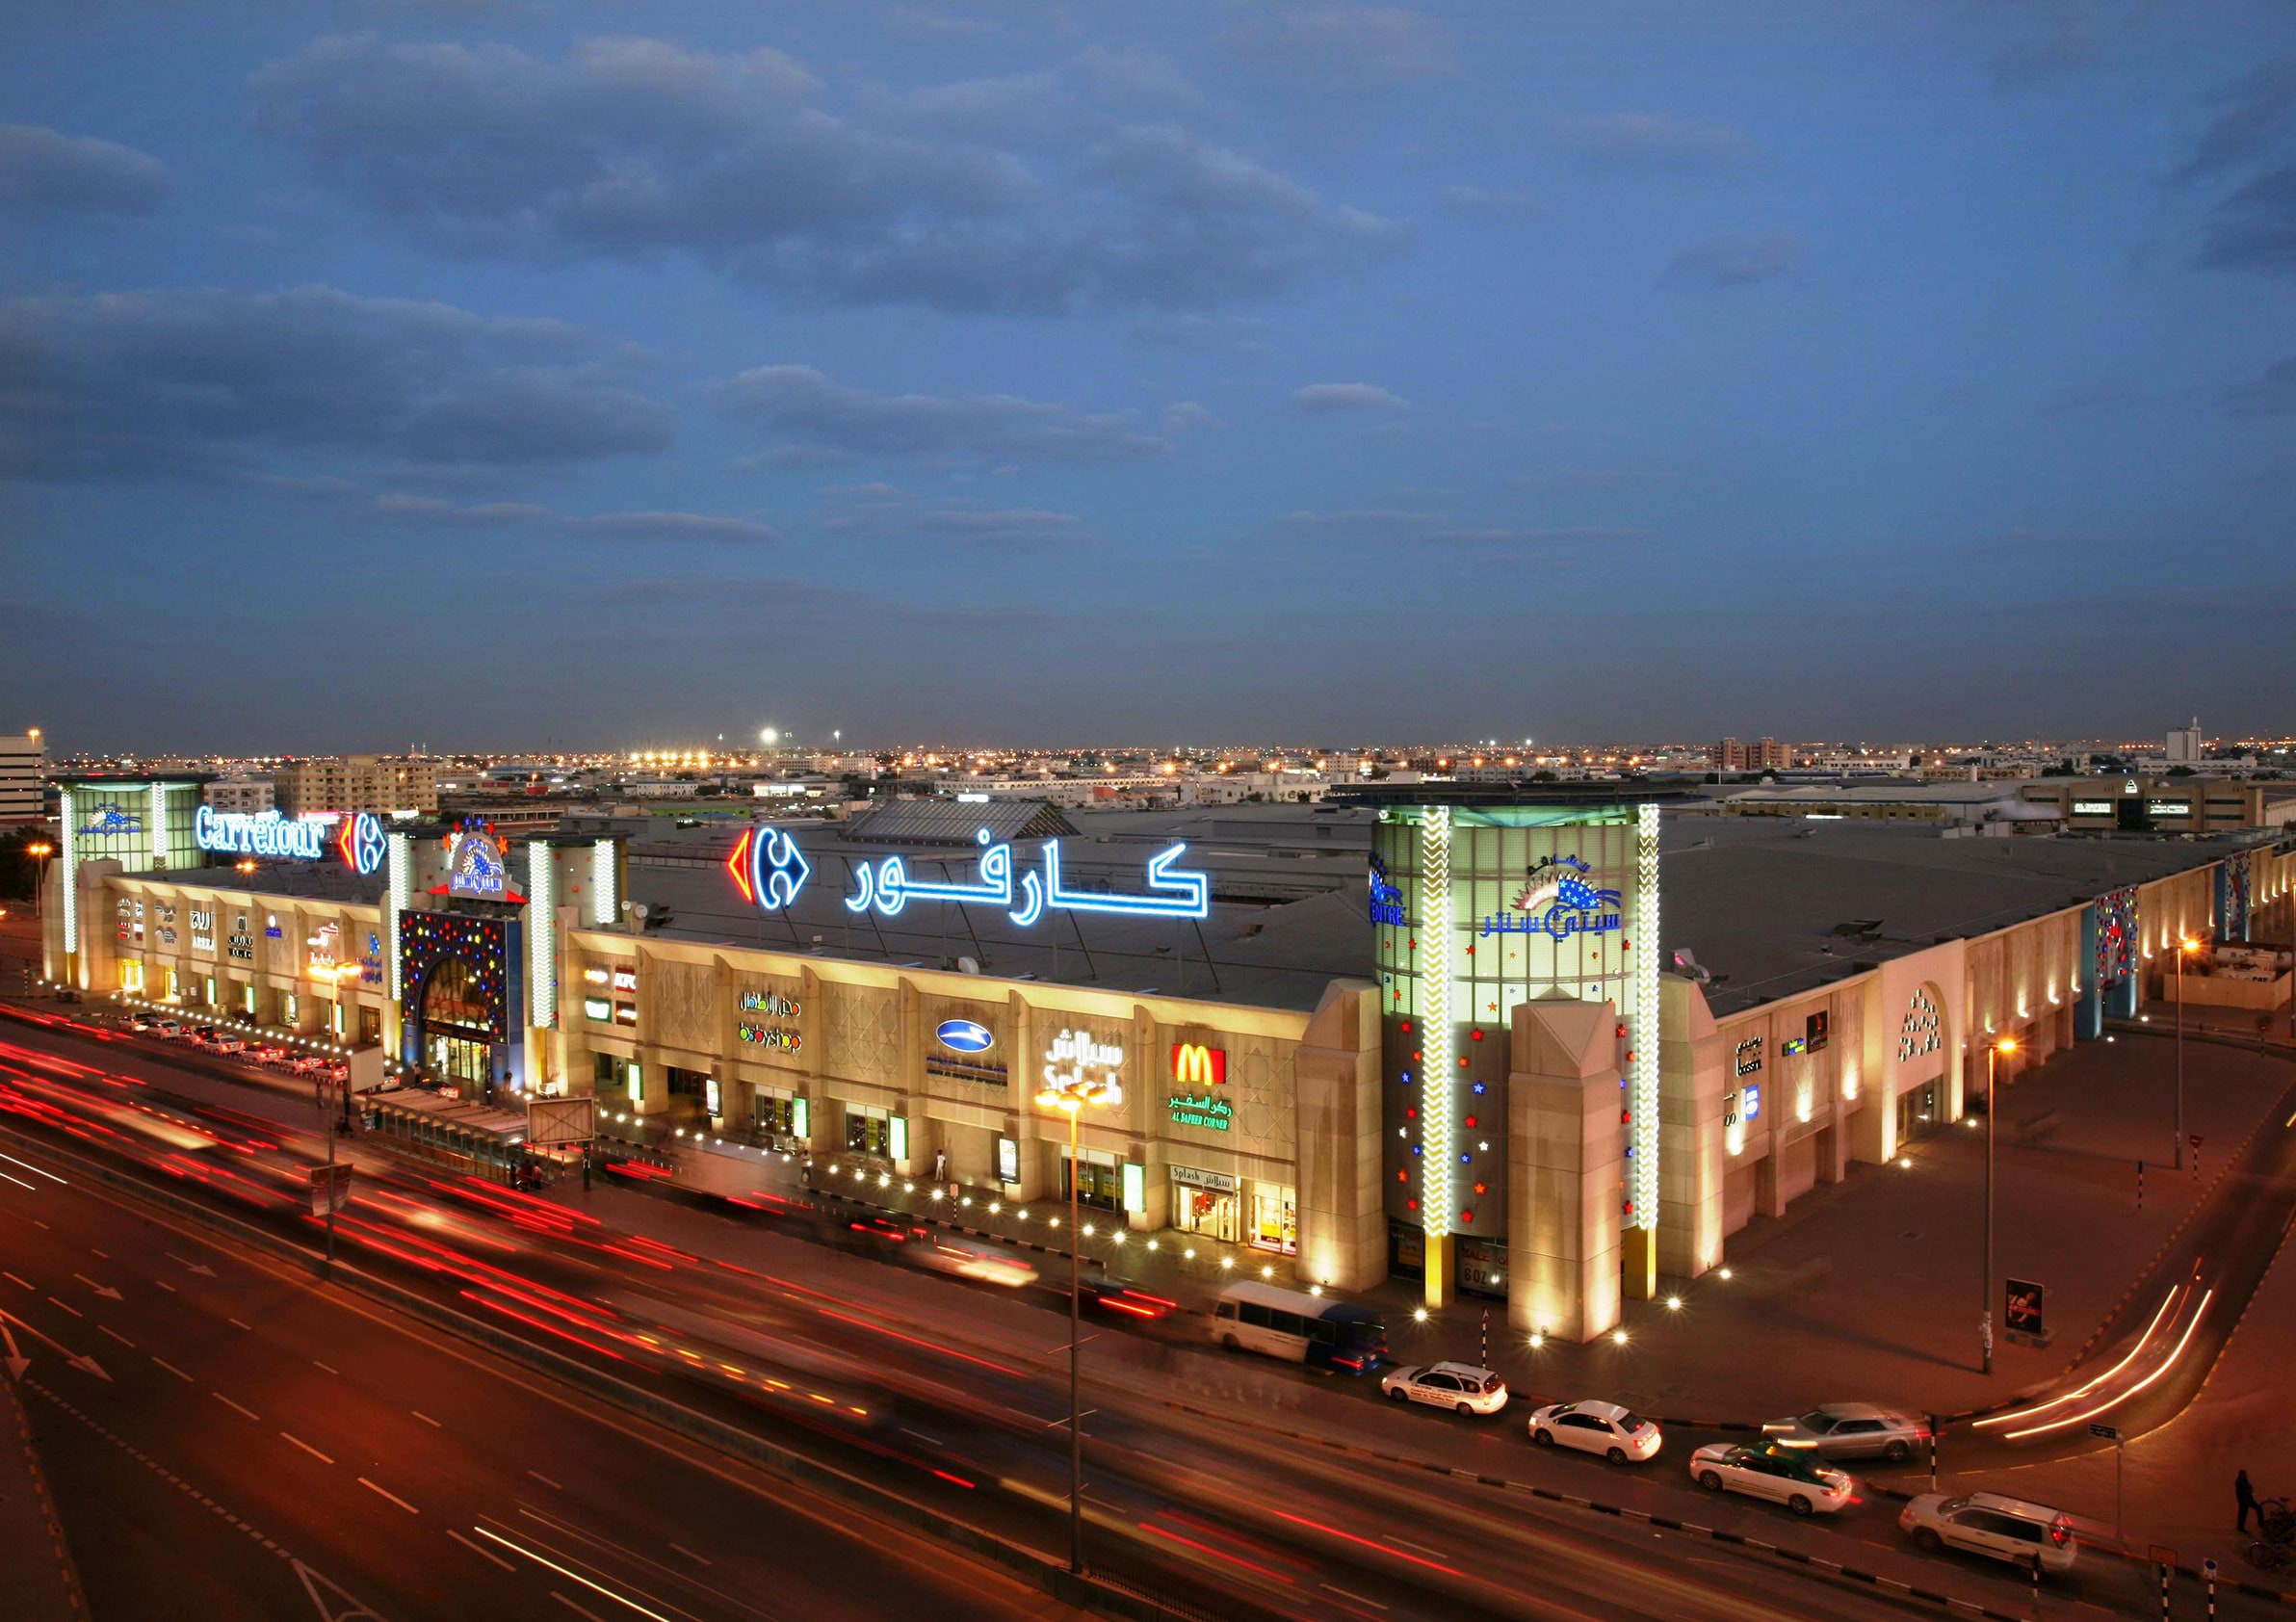 When Mapei Revamped the Sharjah City Centre